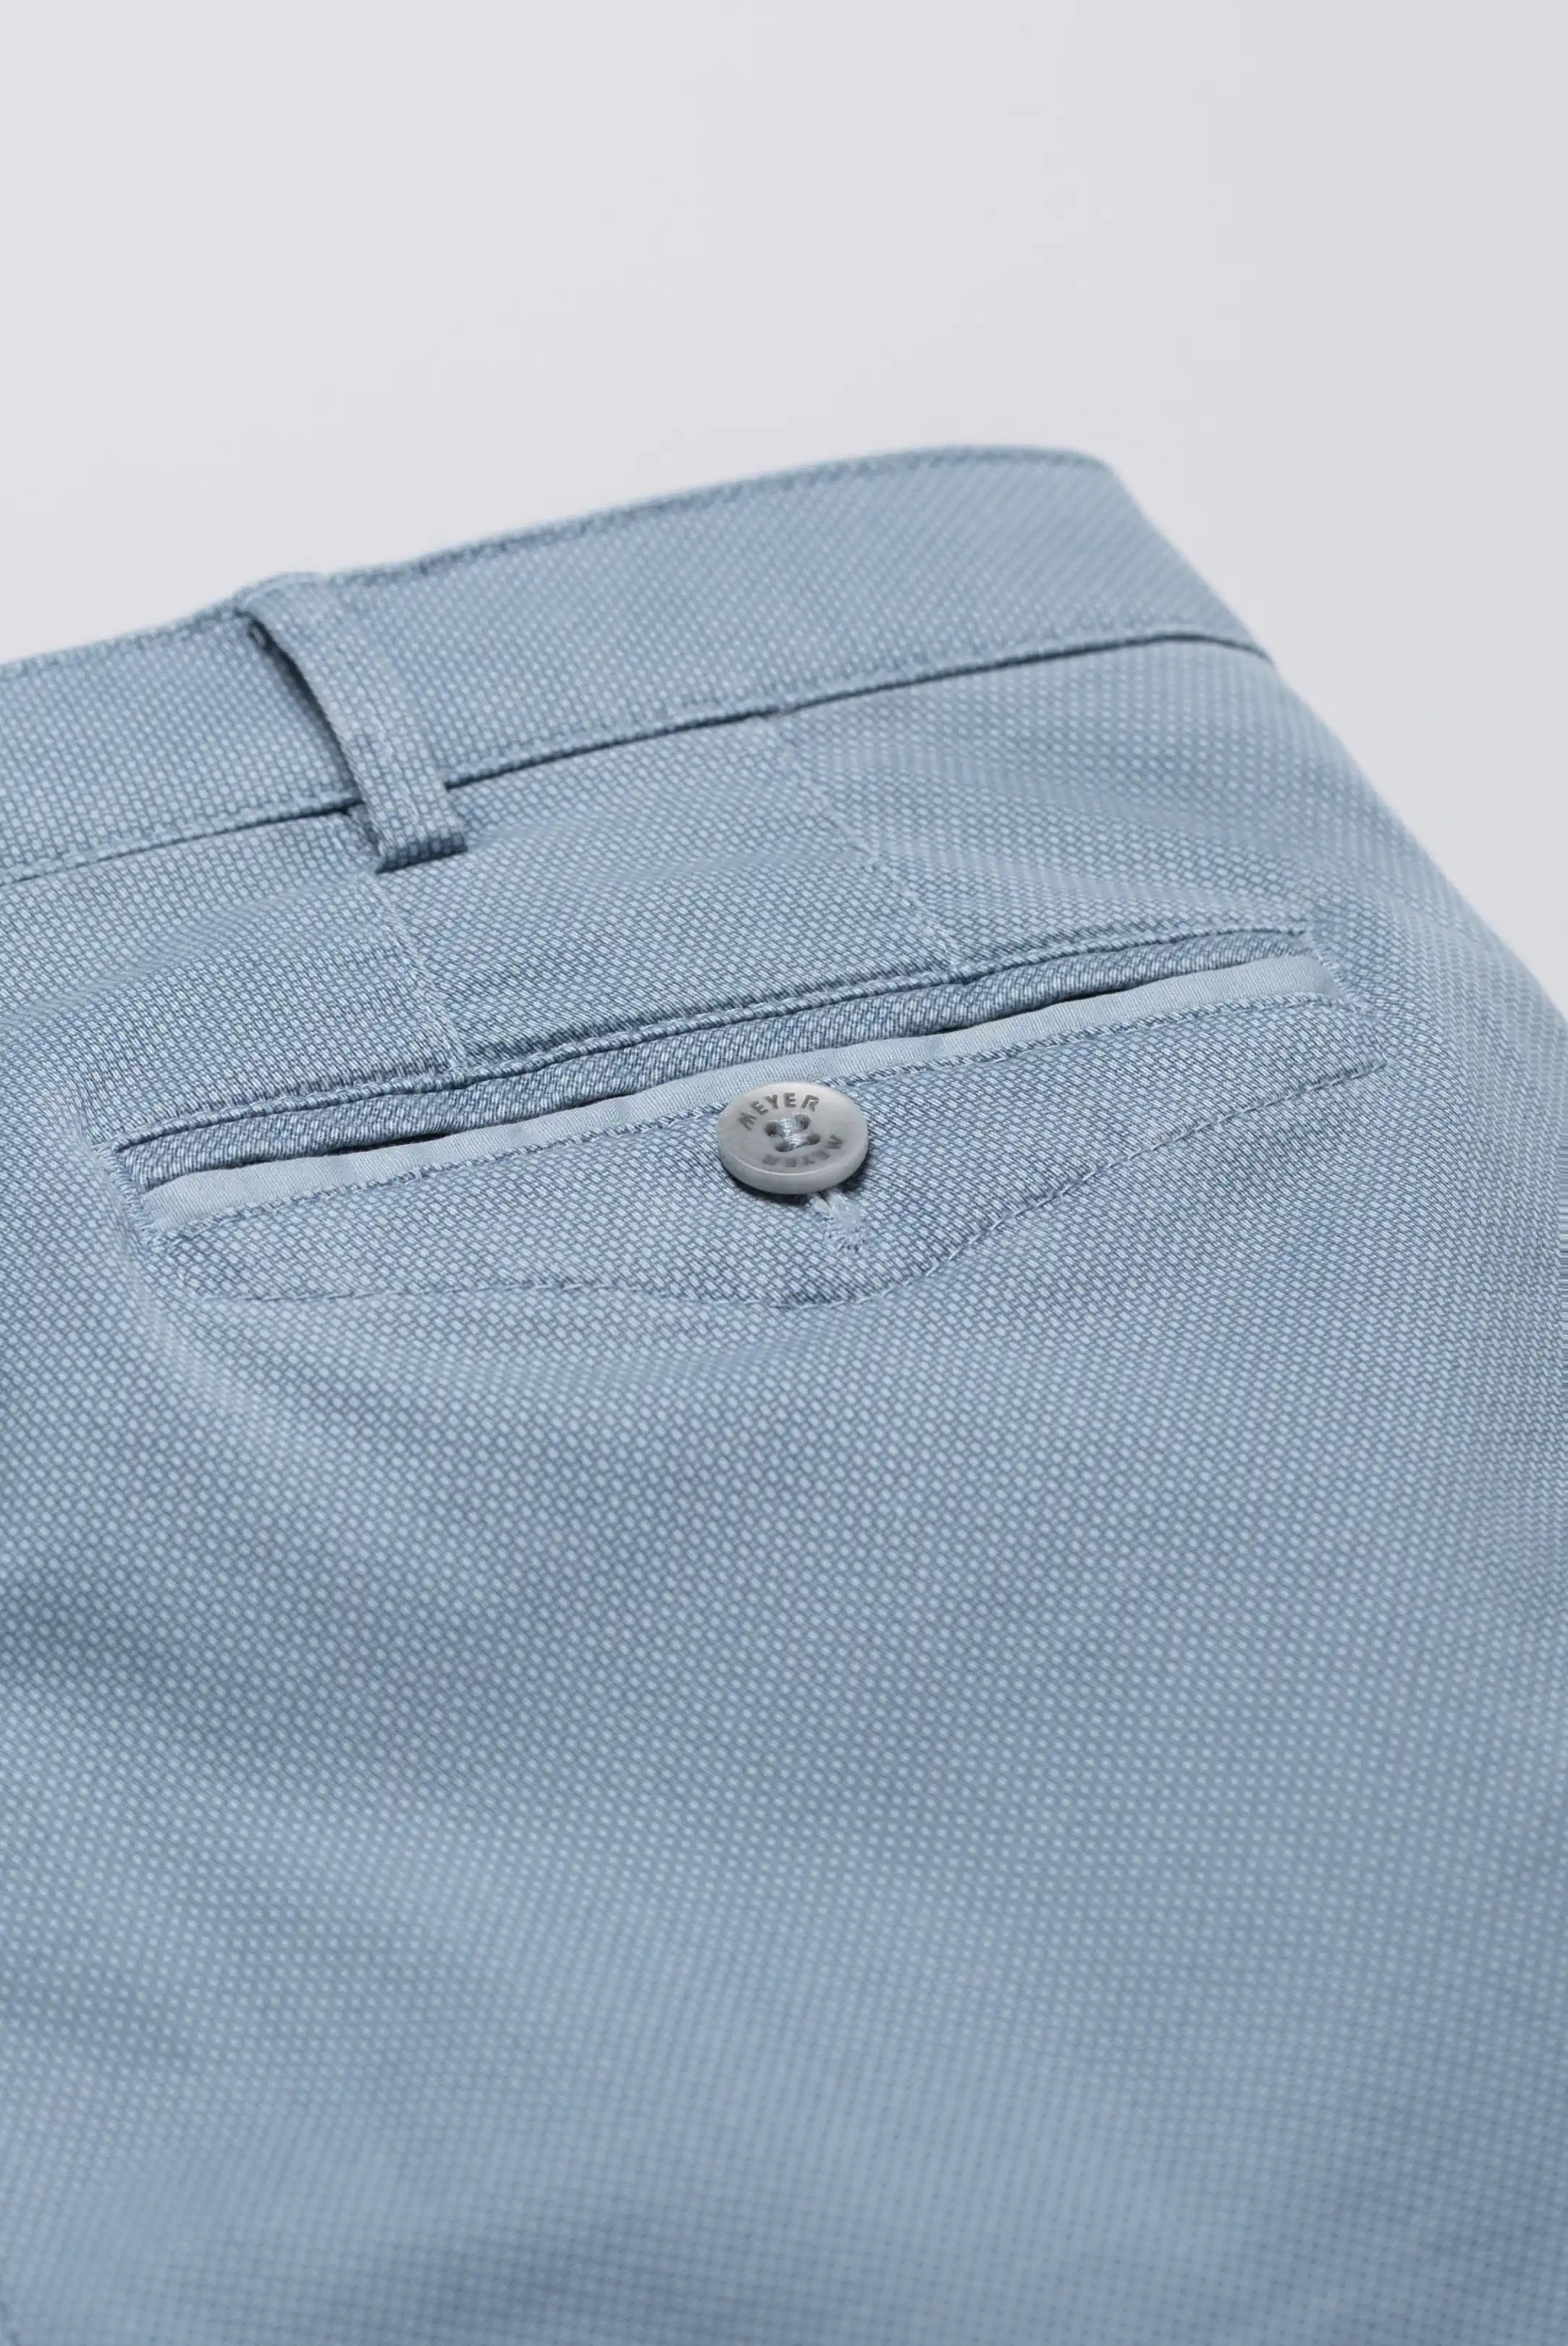 30% OFF - MEYER Chicago Trousers - 5056 Micro Print Cotton Chino - Blue - Sizes: 36 REG & 40 SHORT